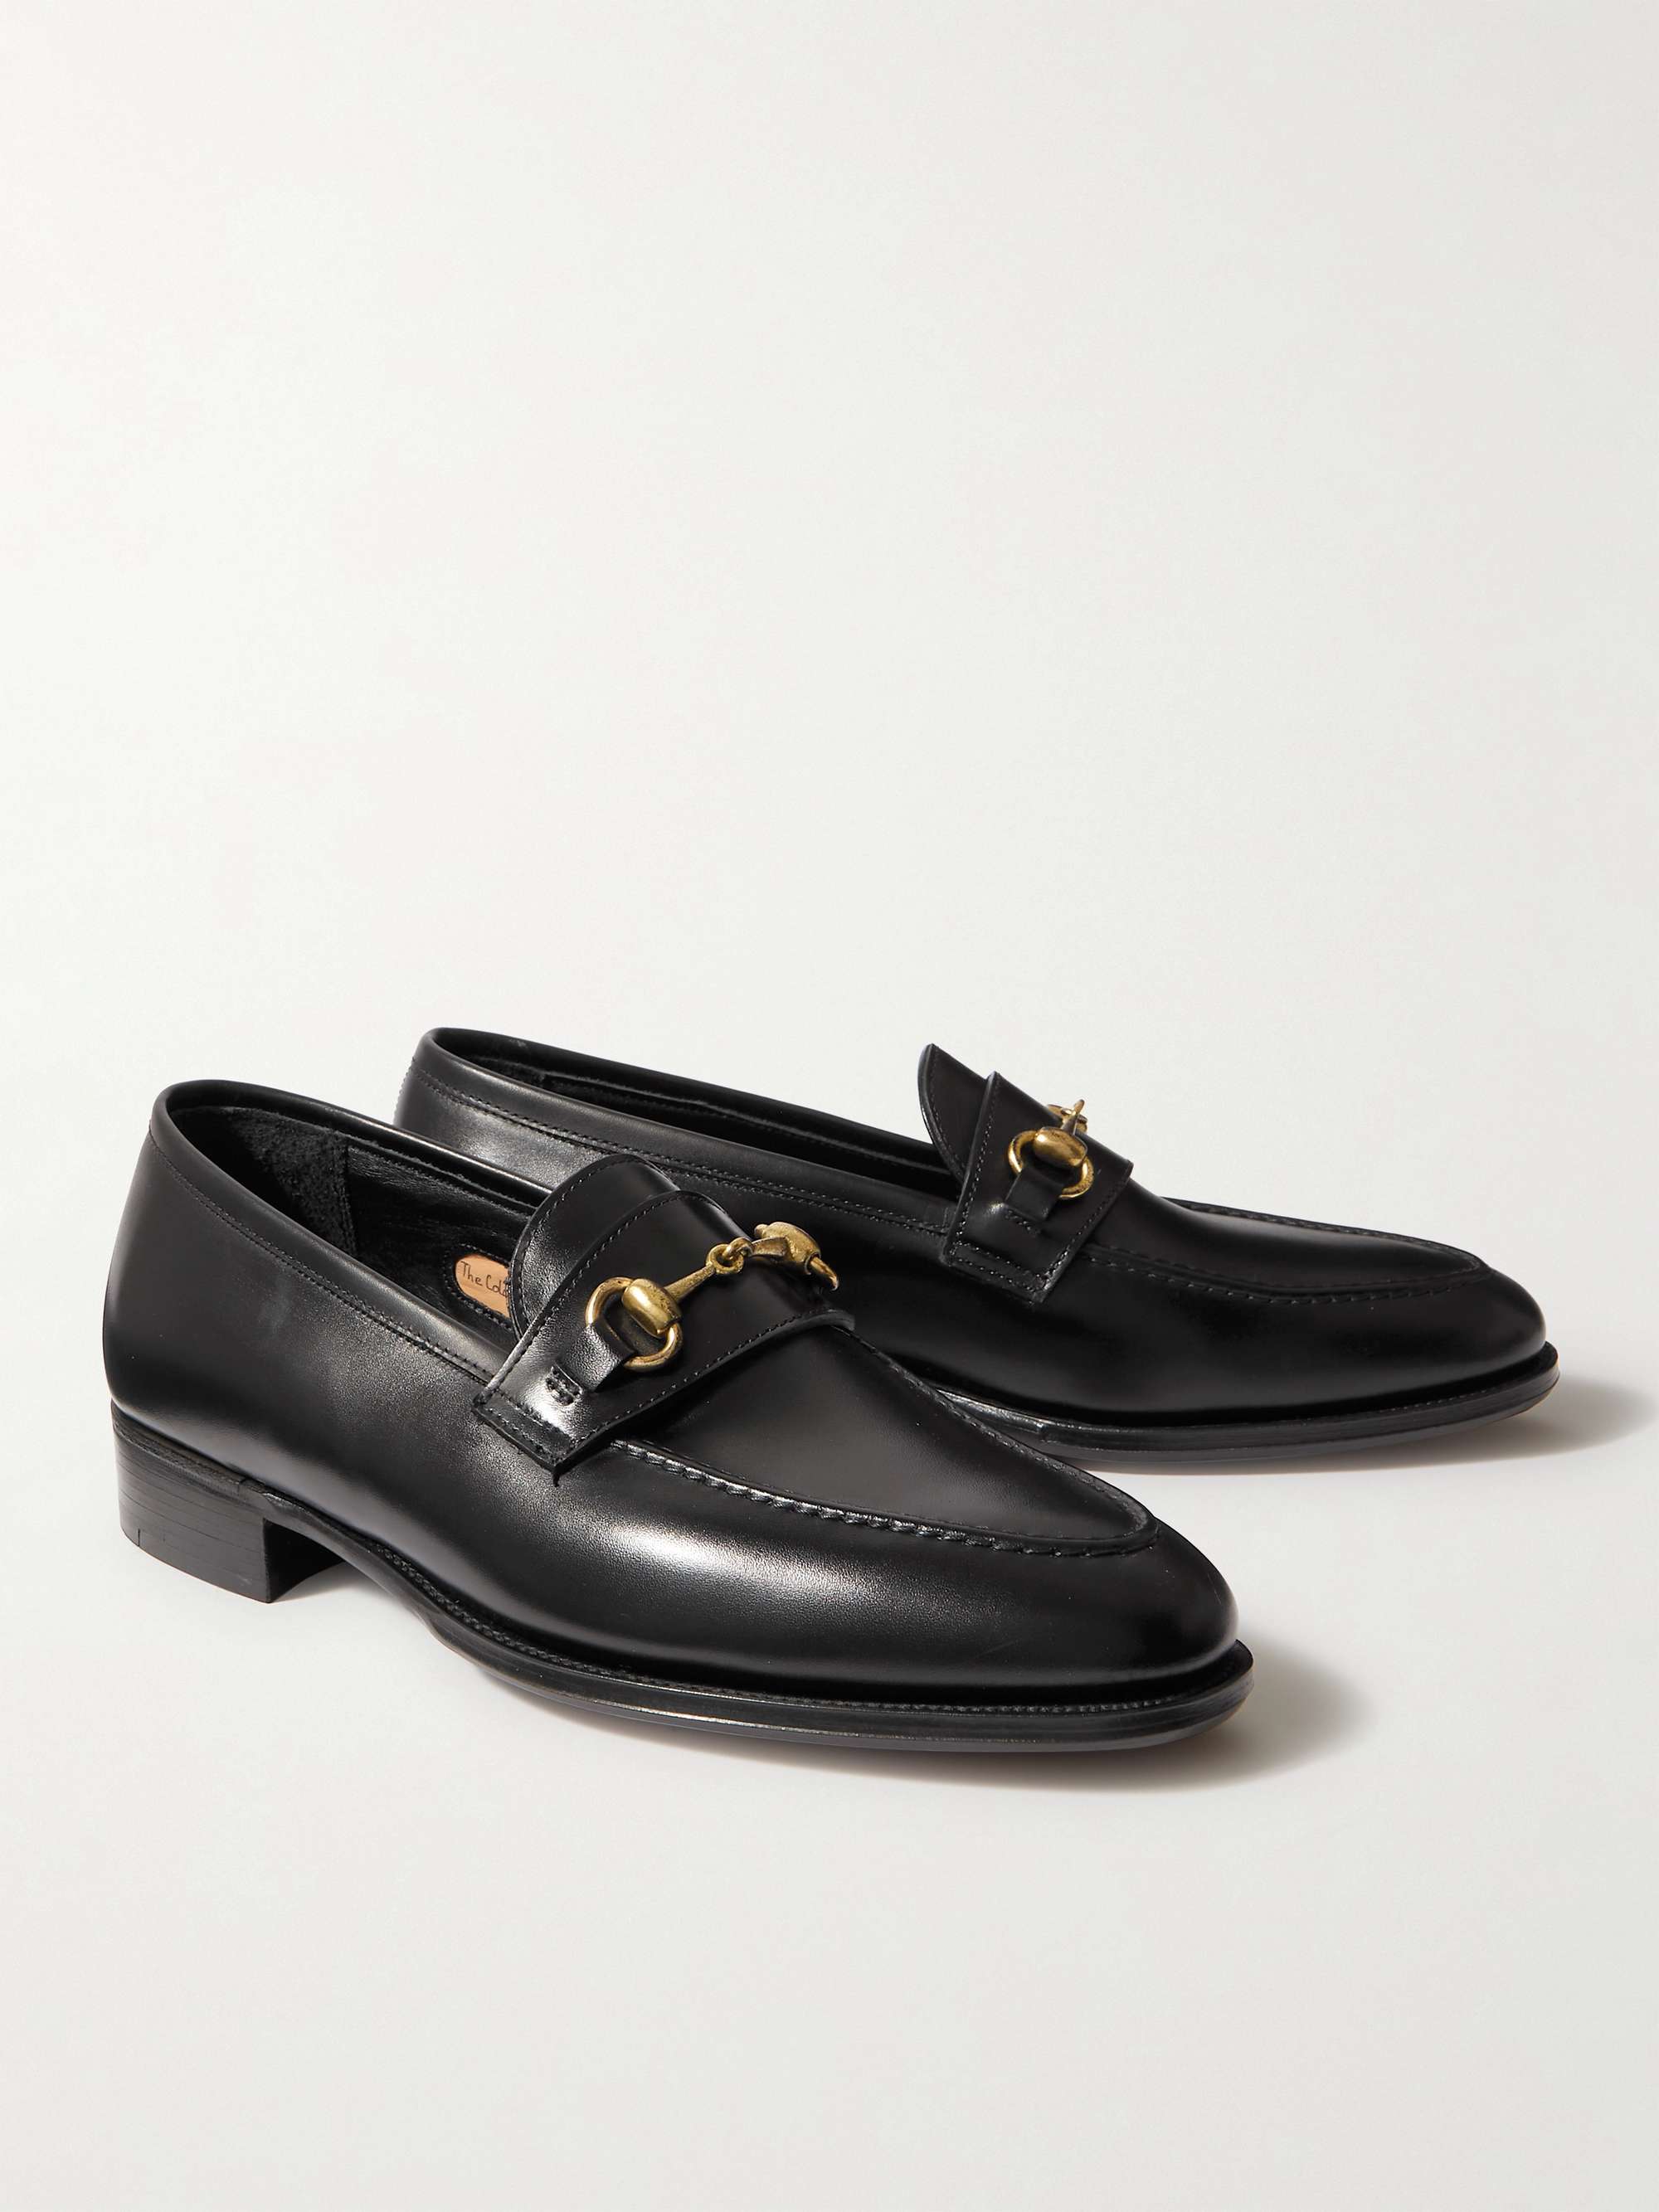 GEORGE CLEVERLEY Colony Horsebit Leather Loafers